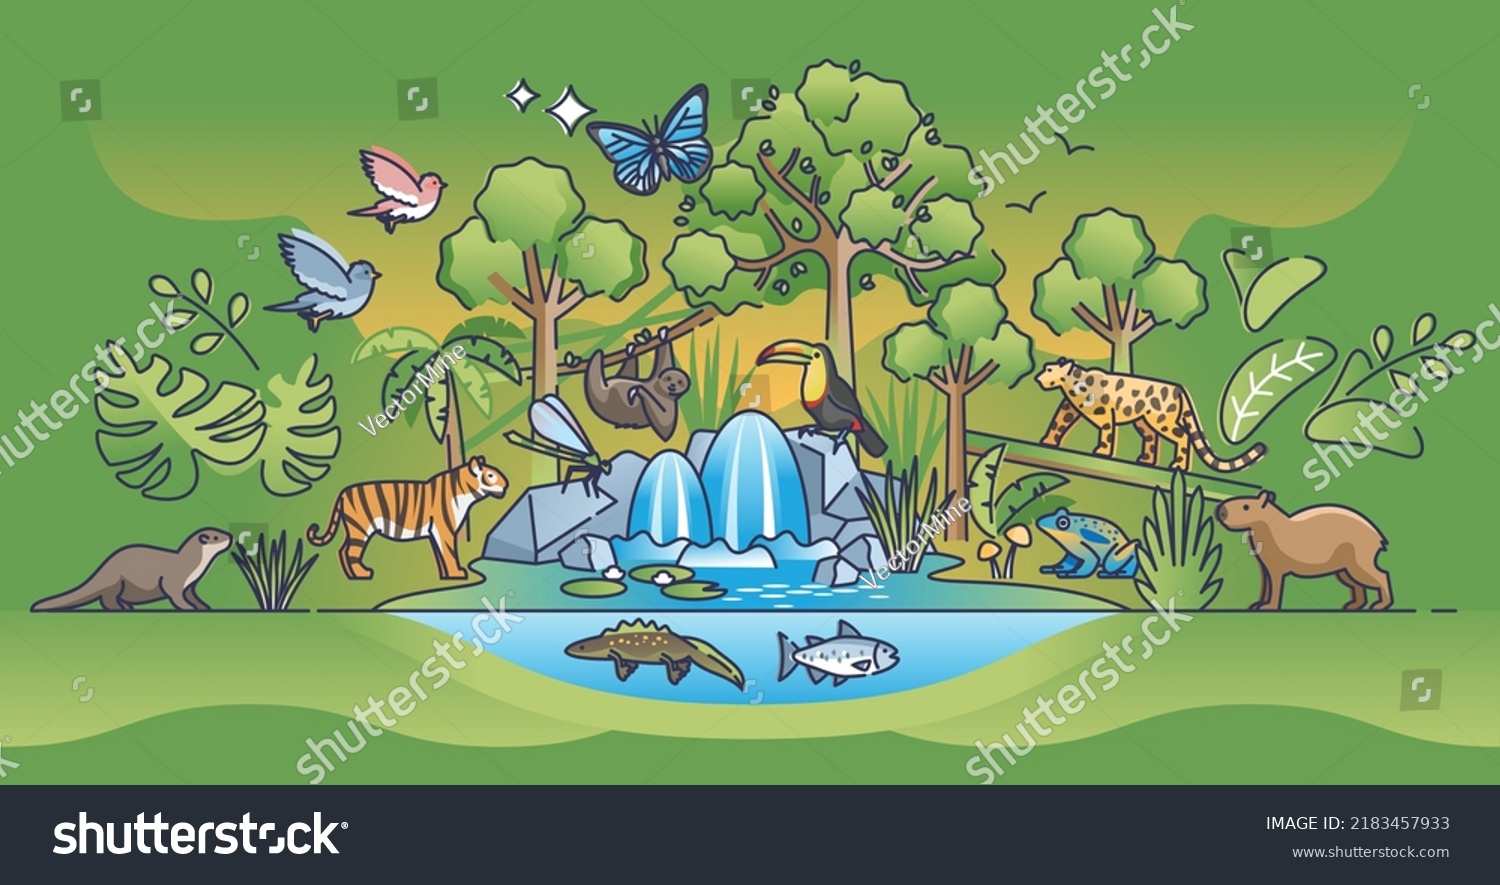 SVG of Jungle landscape as rainforest habitat landform and biome outline concept. Green and lush foliage with fauna and flora biodiversity vector illustration. Forest with tree growth and botany vegetation svg